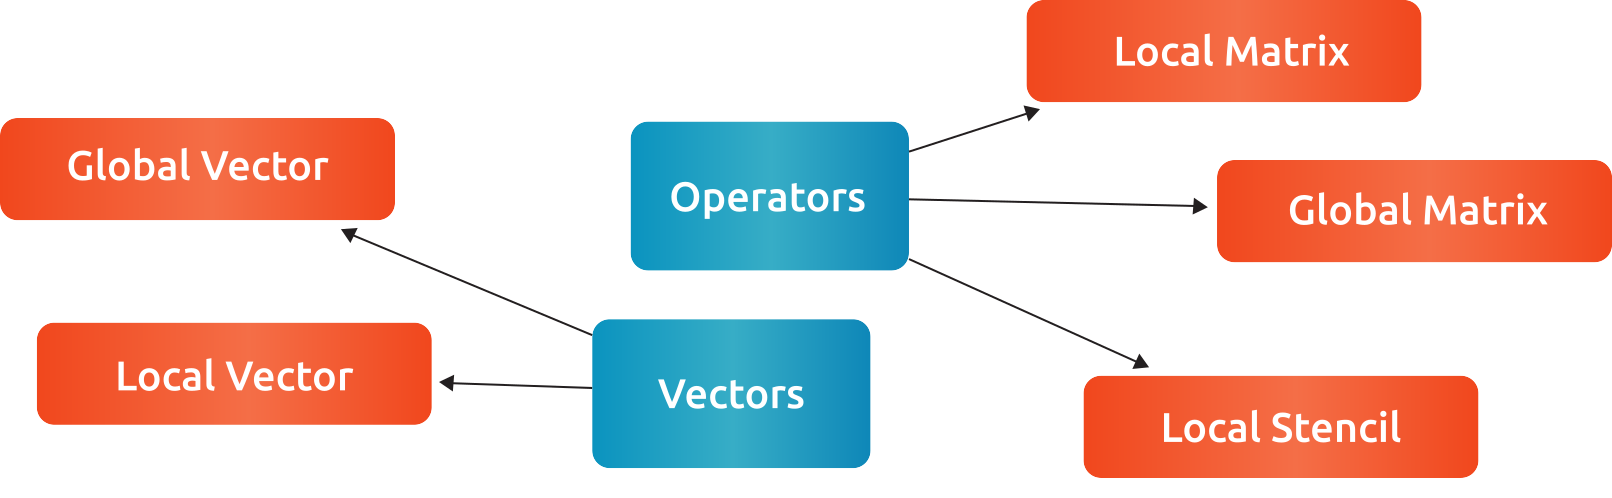 operator and vector classes